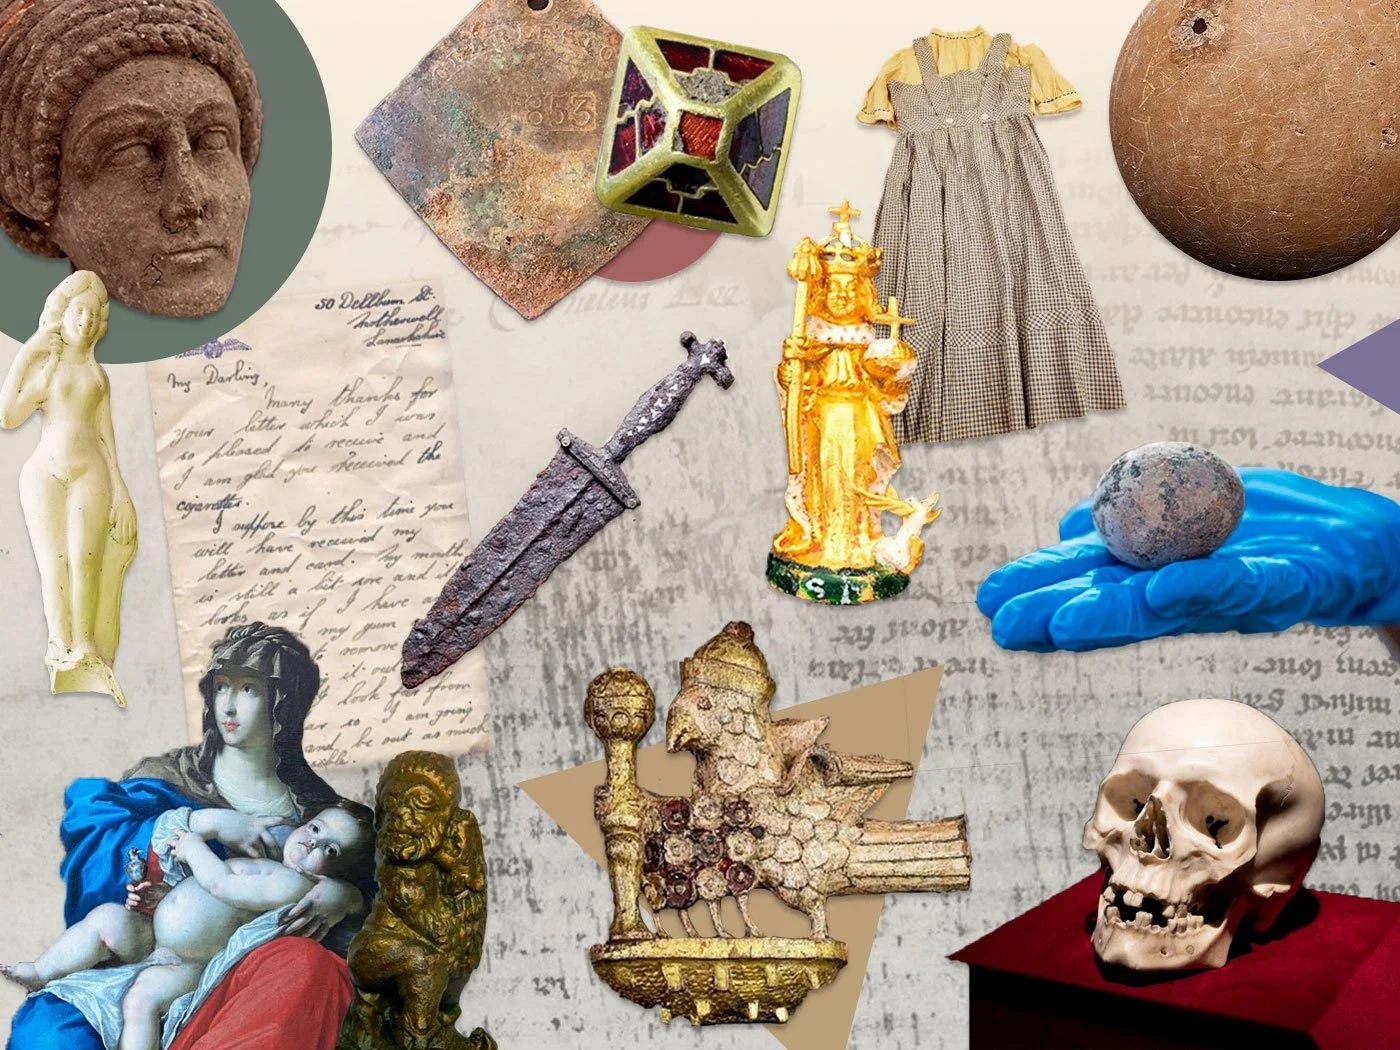 Astonishing Cultural Artifacts From Ancient Civilizations - Unlocking The Secrets Of The Past